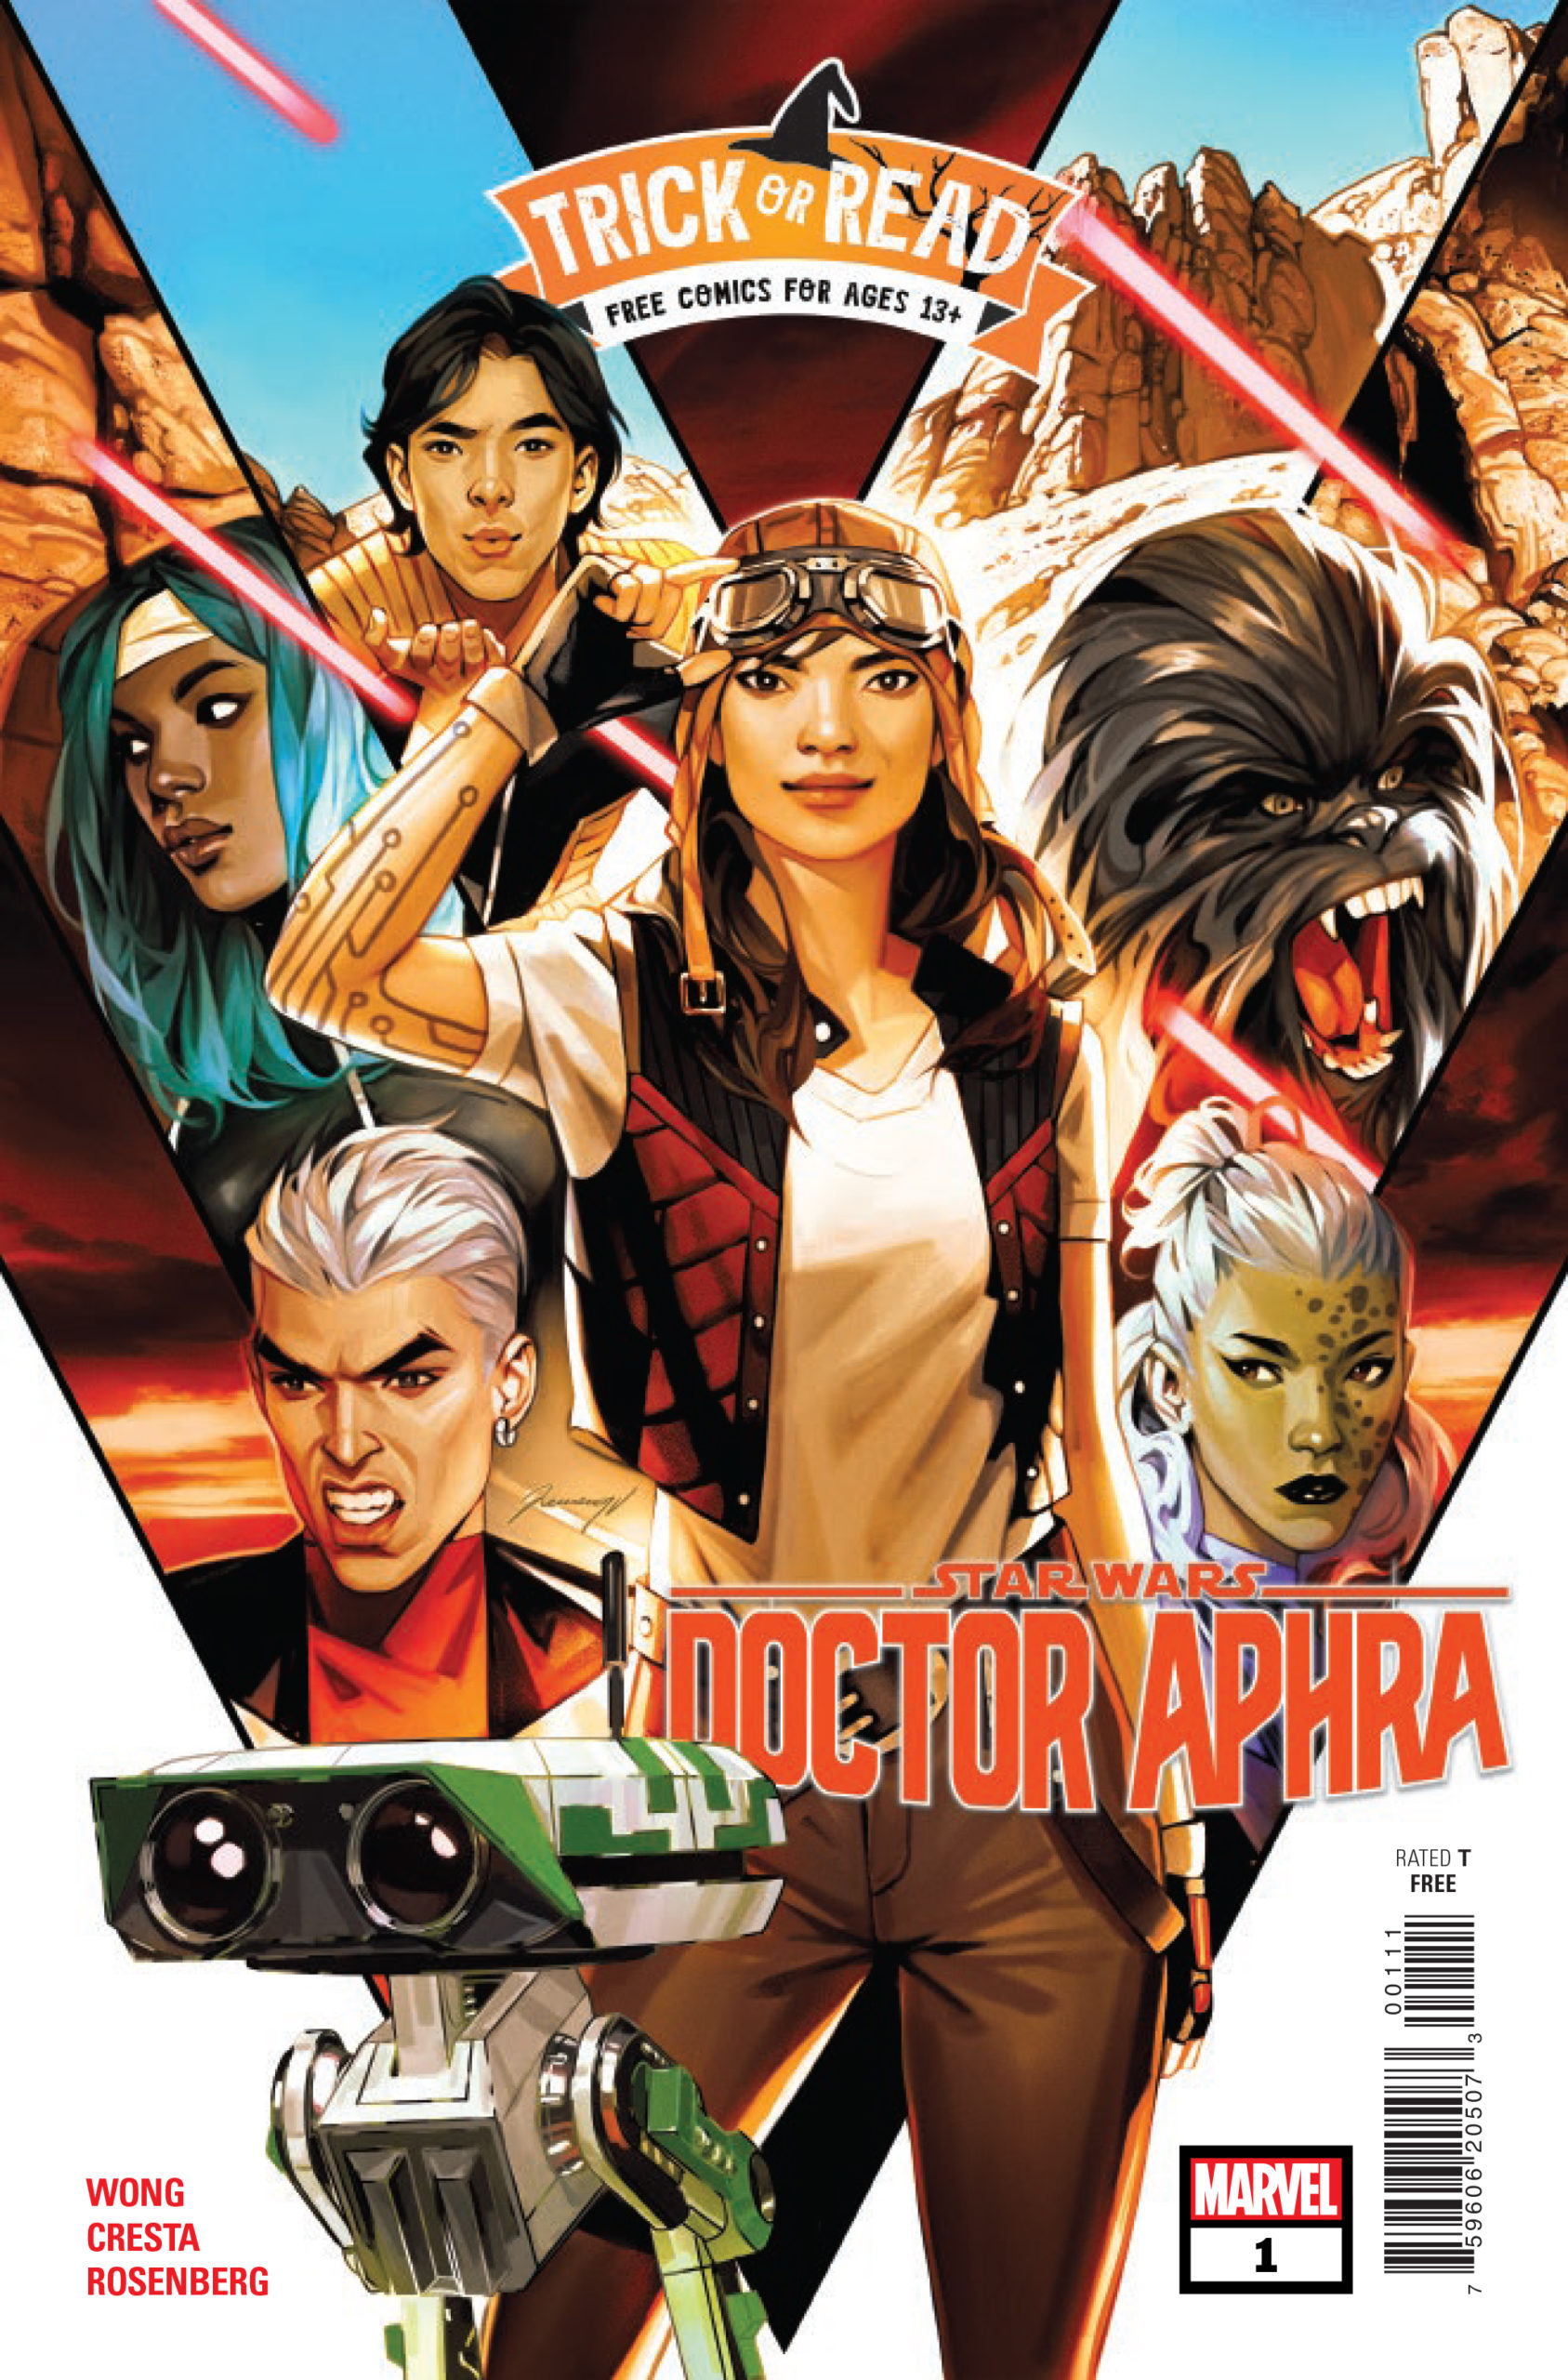 Doctor Aphra #1 ("Trick-or-Read" 2022 Free Reprint) (29.10.2022)